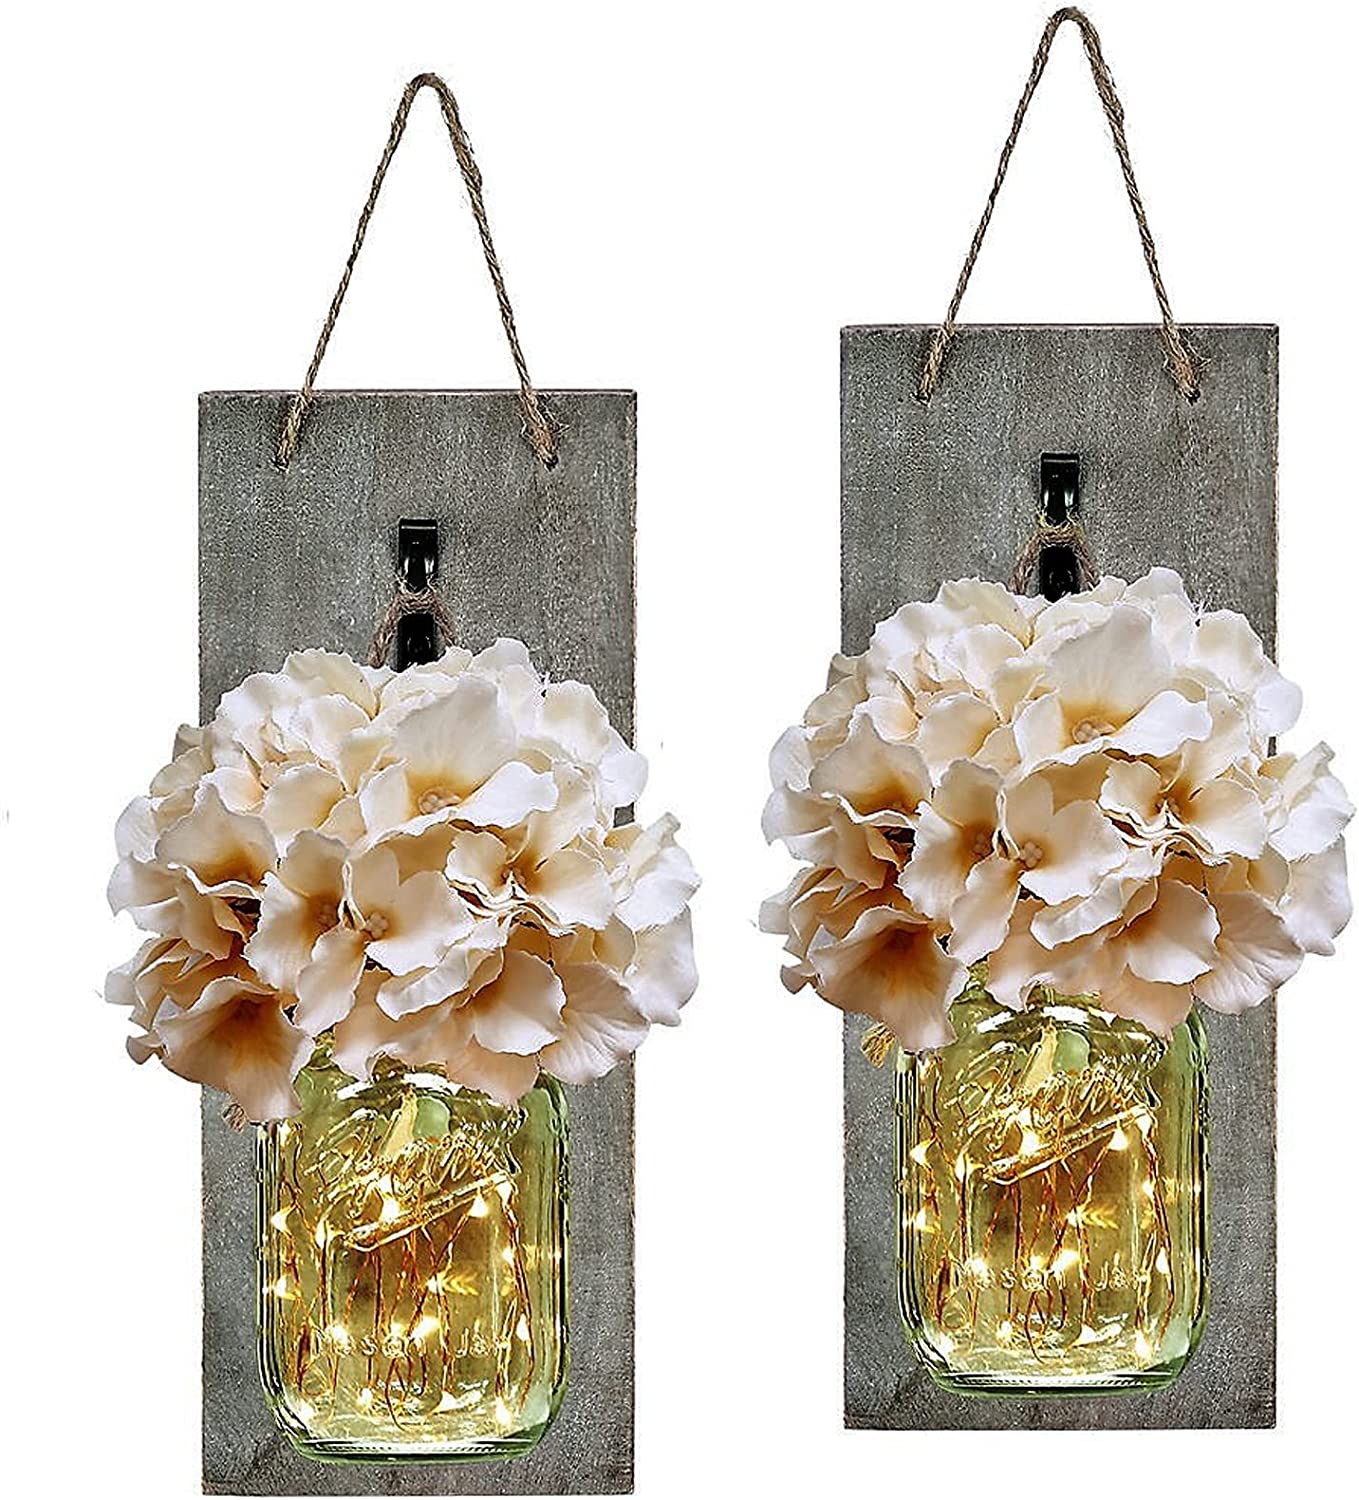 HABOM Rustic Mason Jar Wall Decor SCONCES - Decorative Home Lighted Country House Hanging with LED F